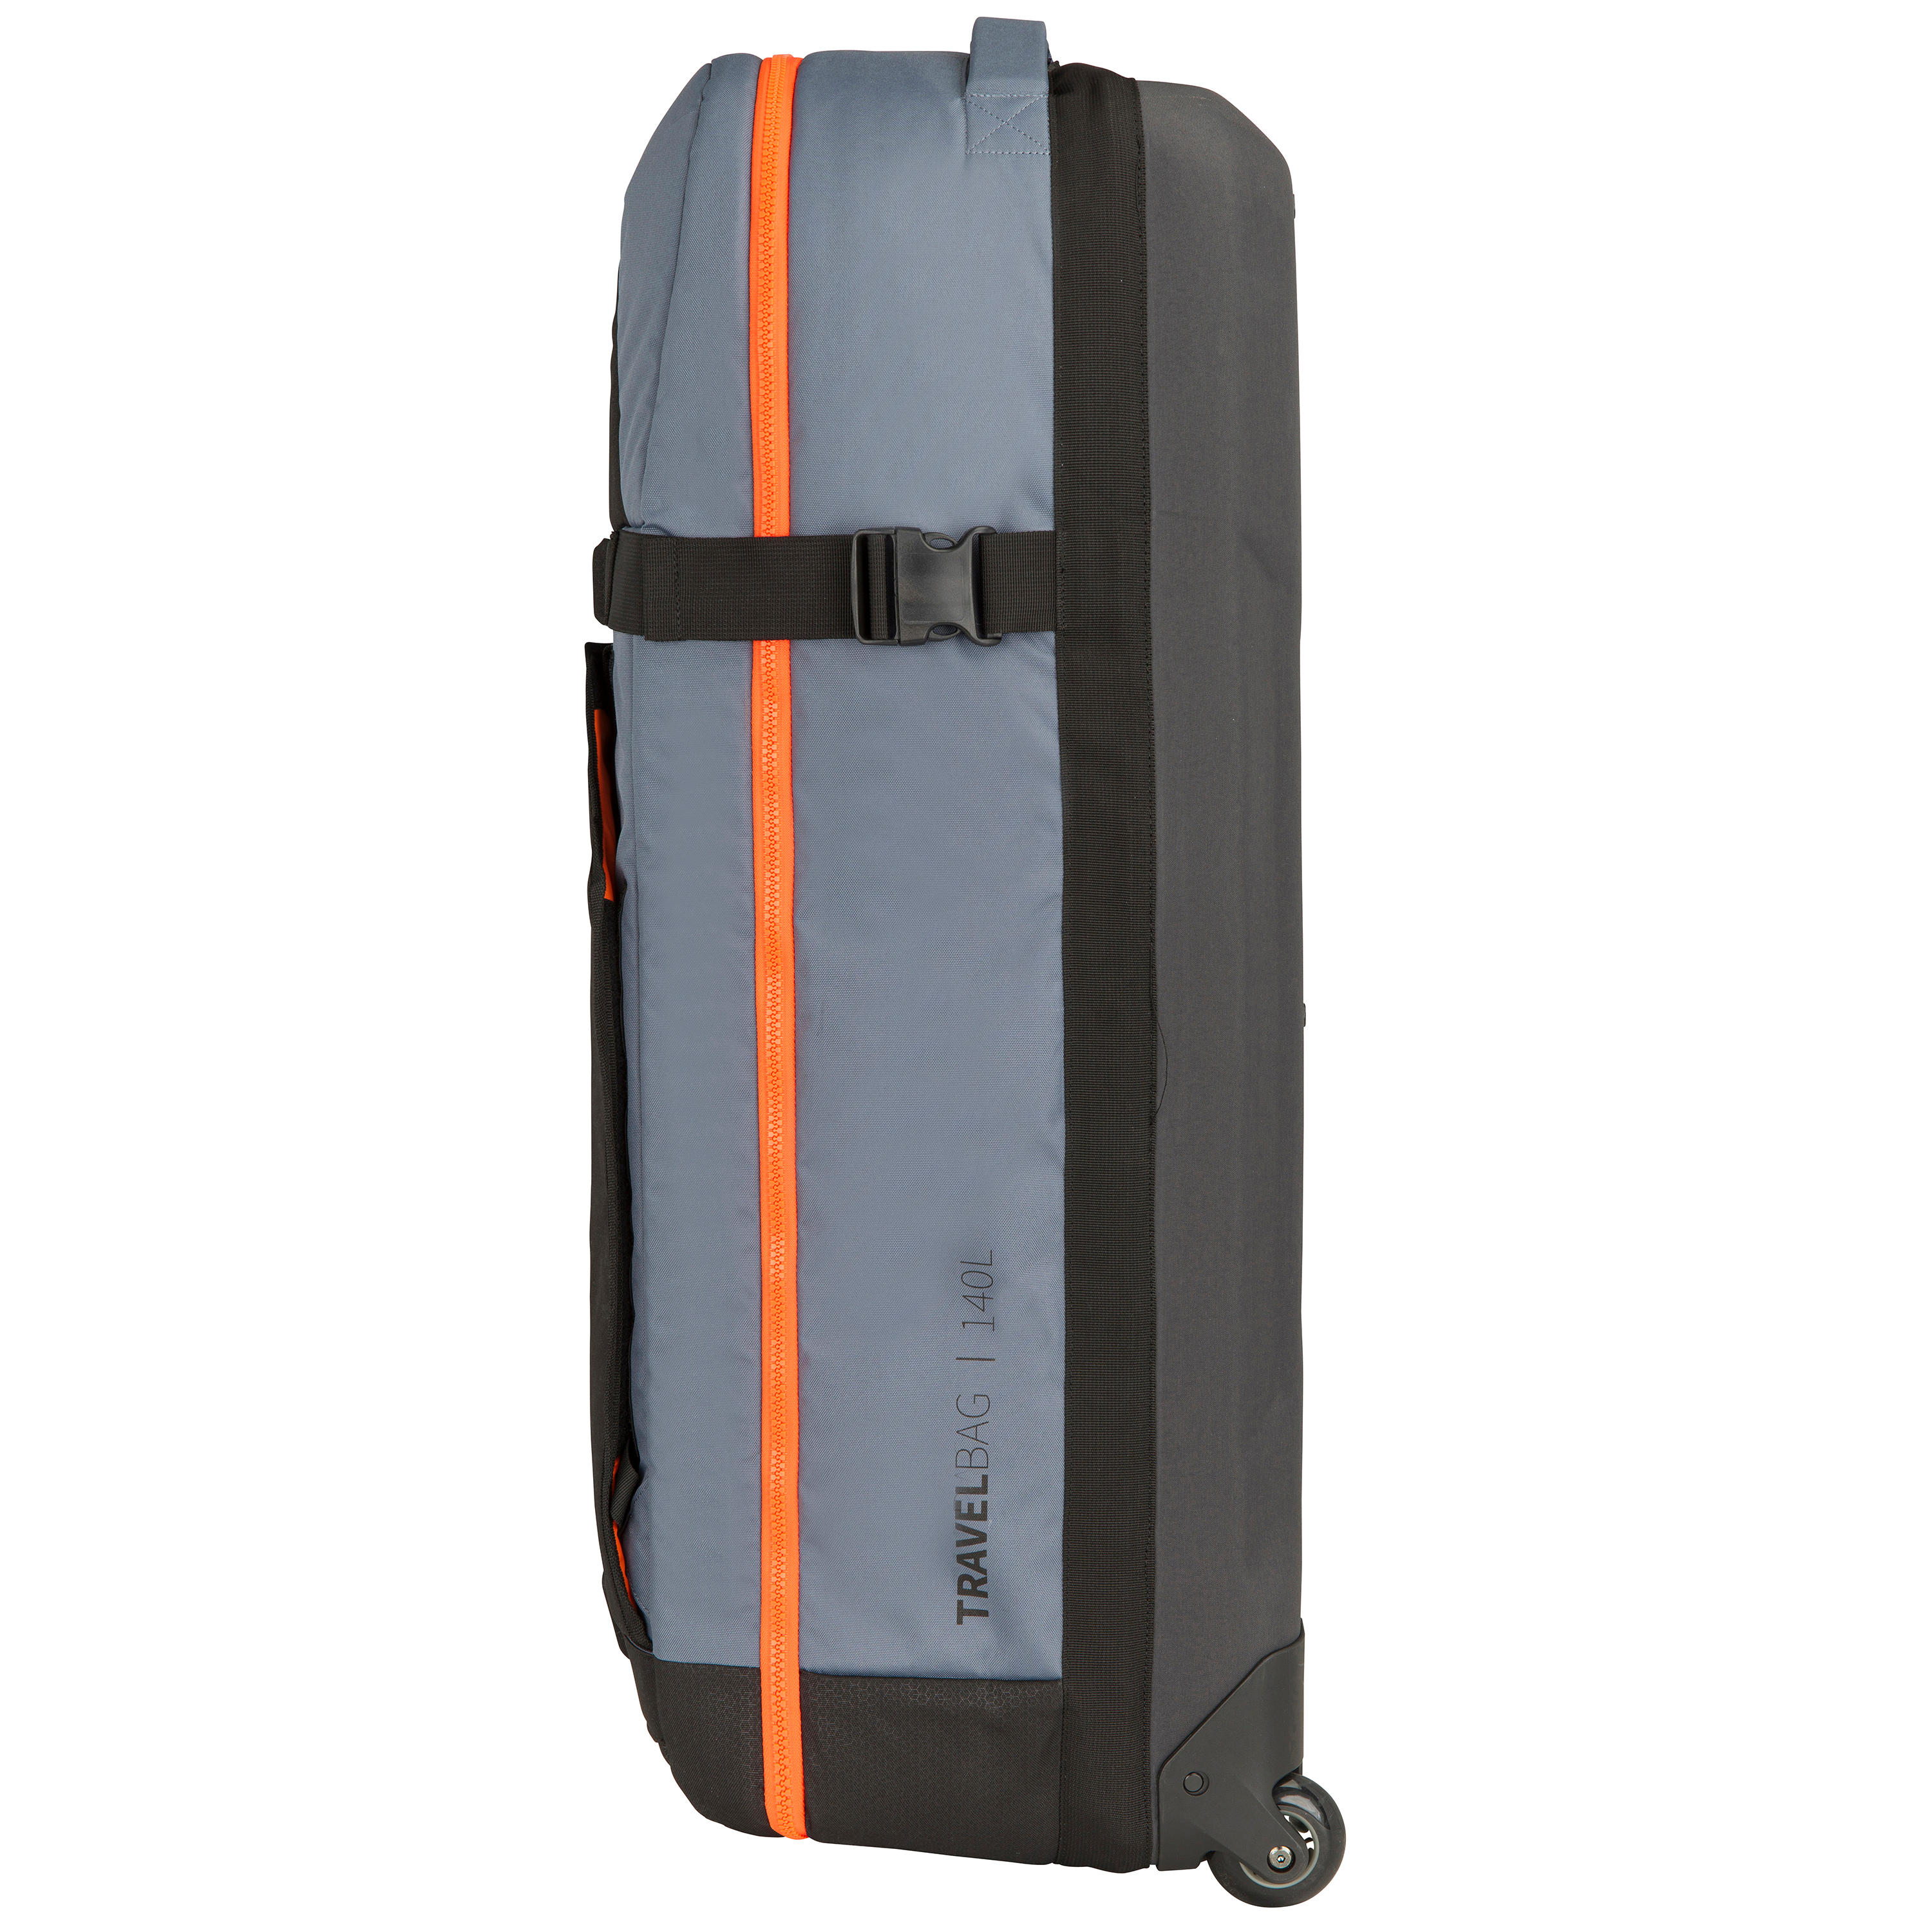 SHELLED TROLLEY TRAVEL BAG 140L FOR TRAVELLER WITH STAND UP PADDLE | STB500 6/19